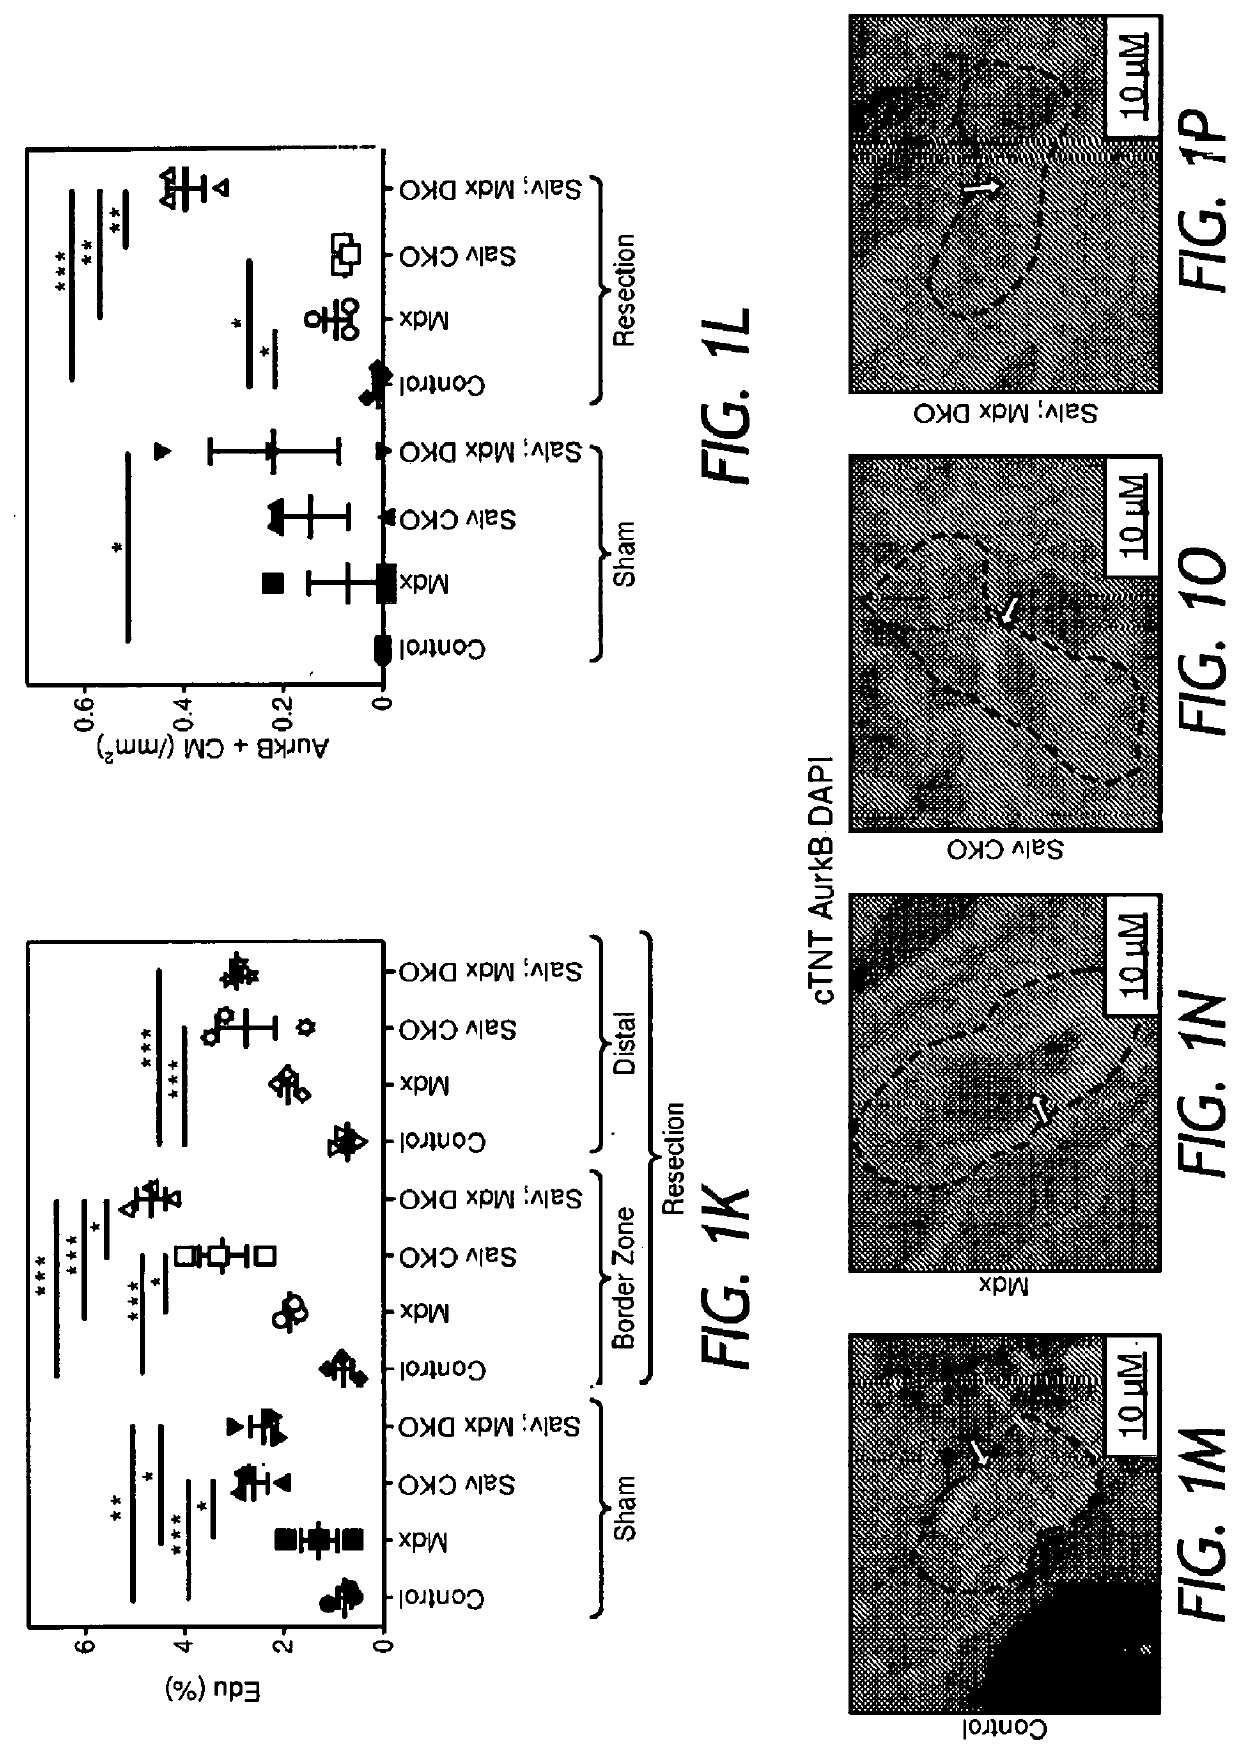 Dystrophin glycoprotein complex sequesters yap to inhibit cardiomyocyte proliferation